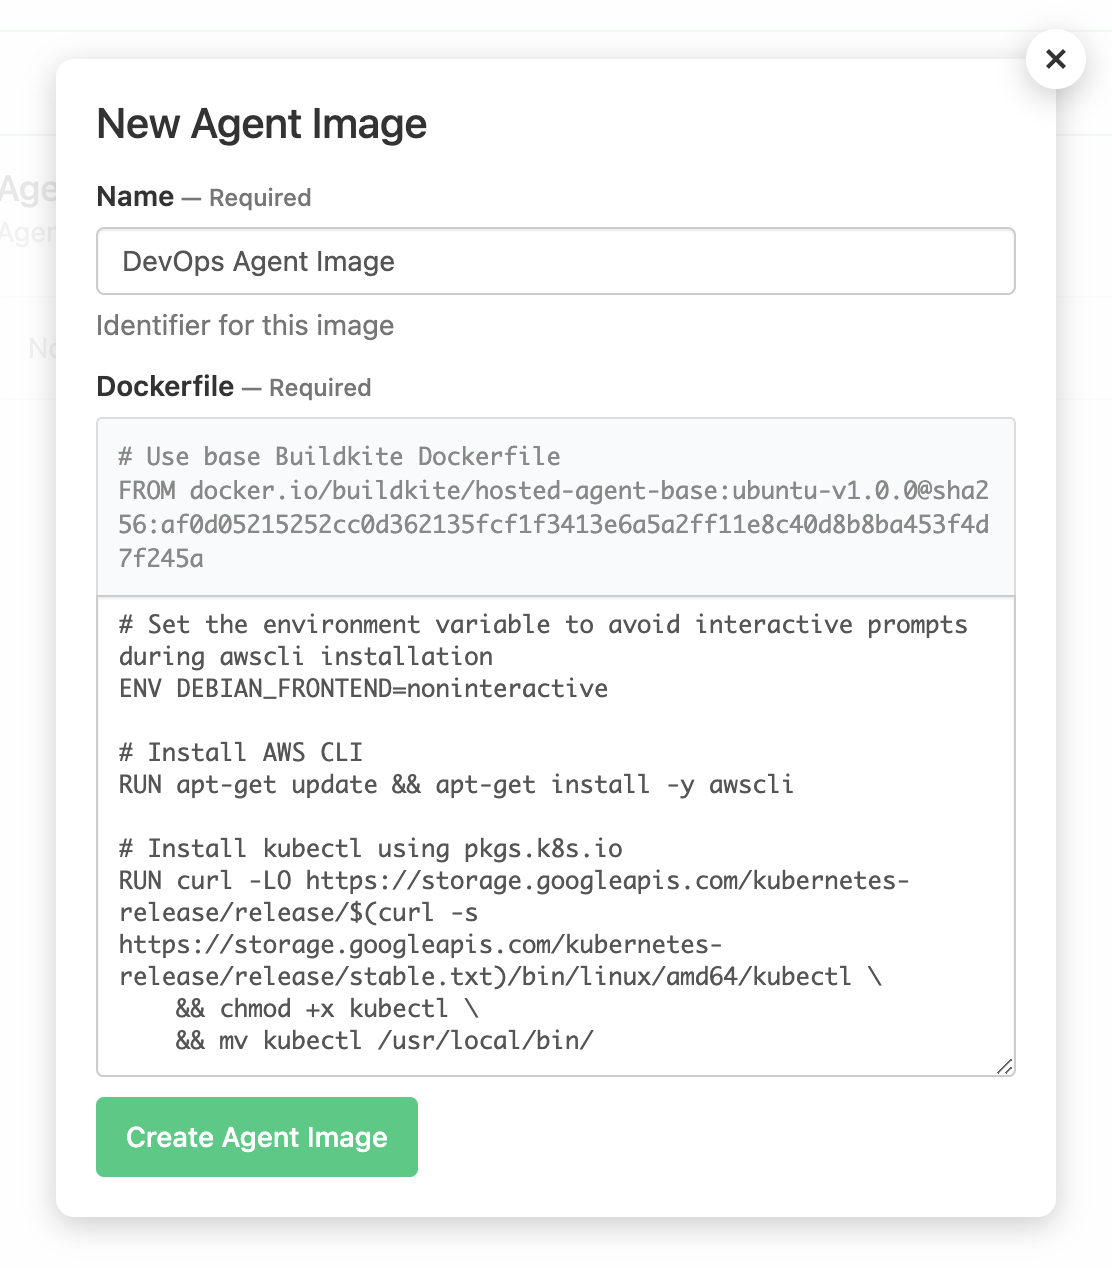 Hosted agents create image form displayed in the Buildkite UI